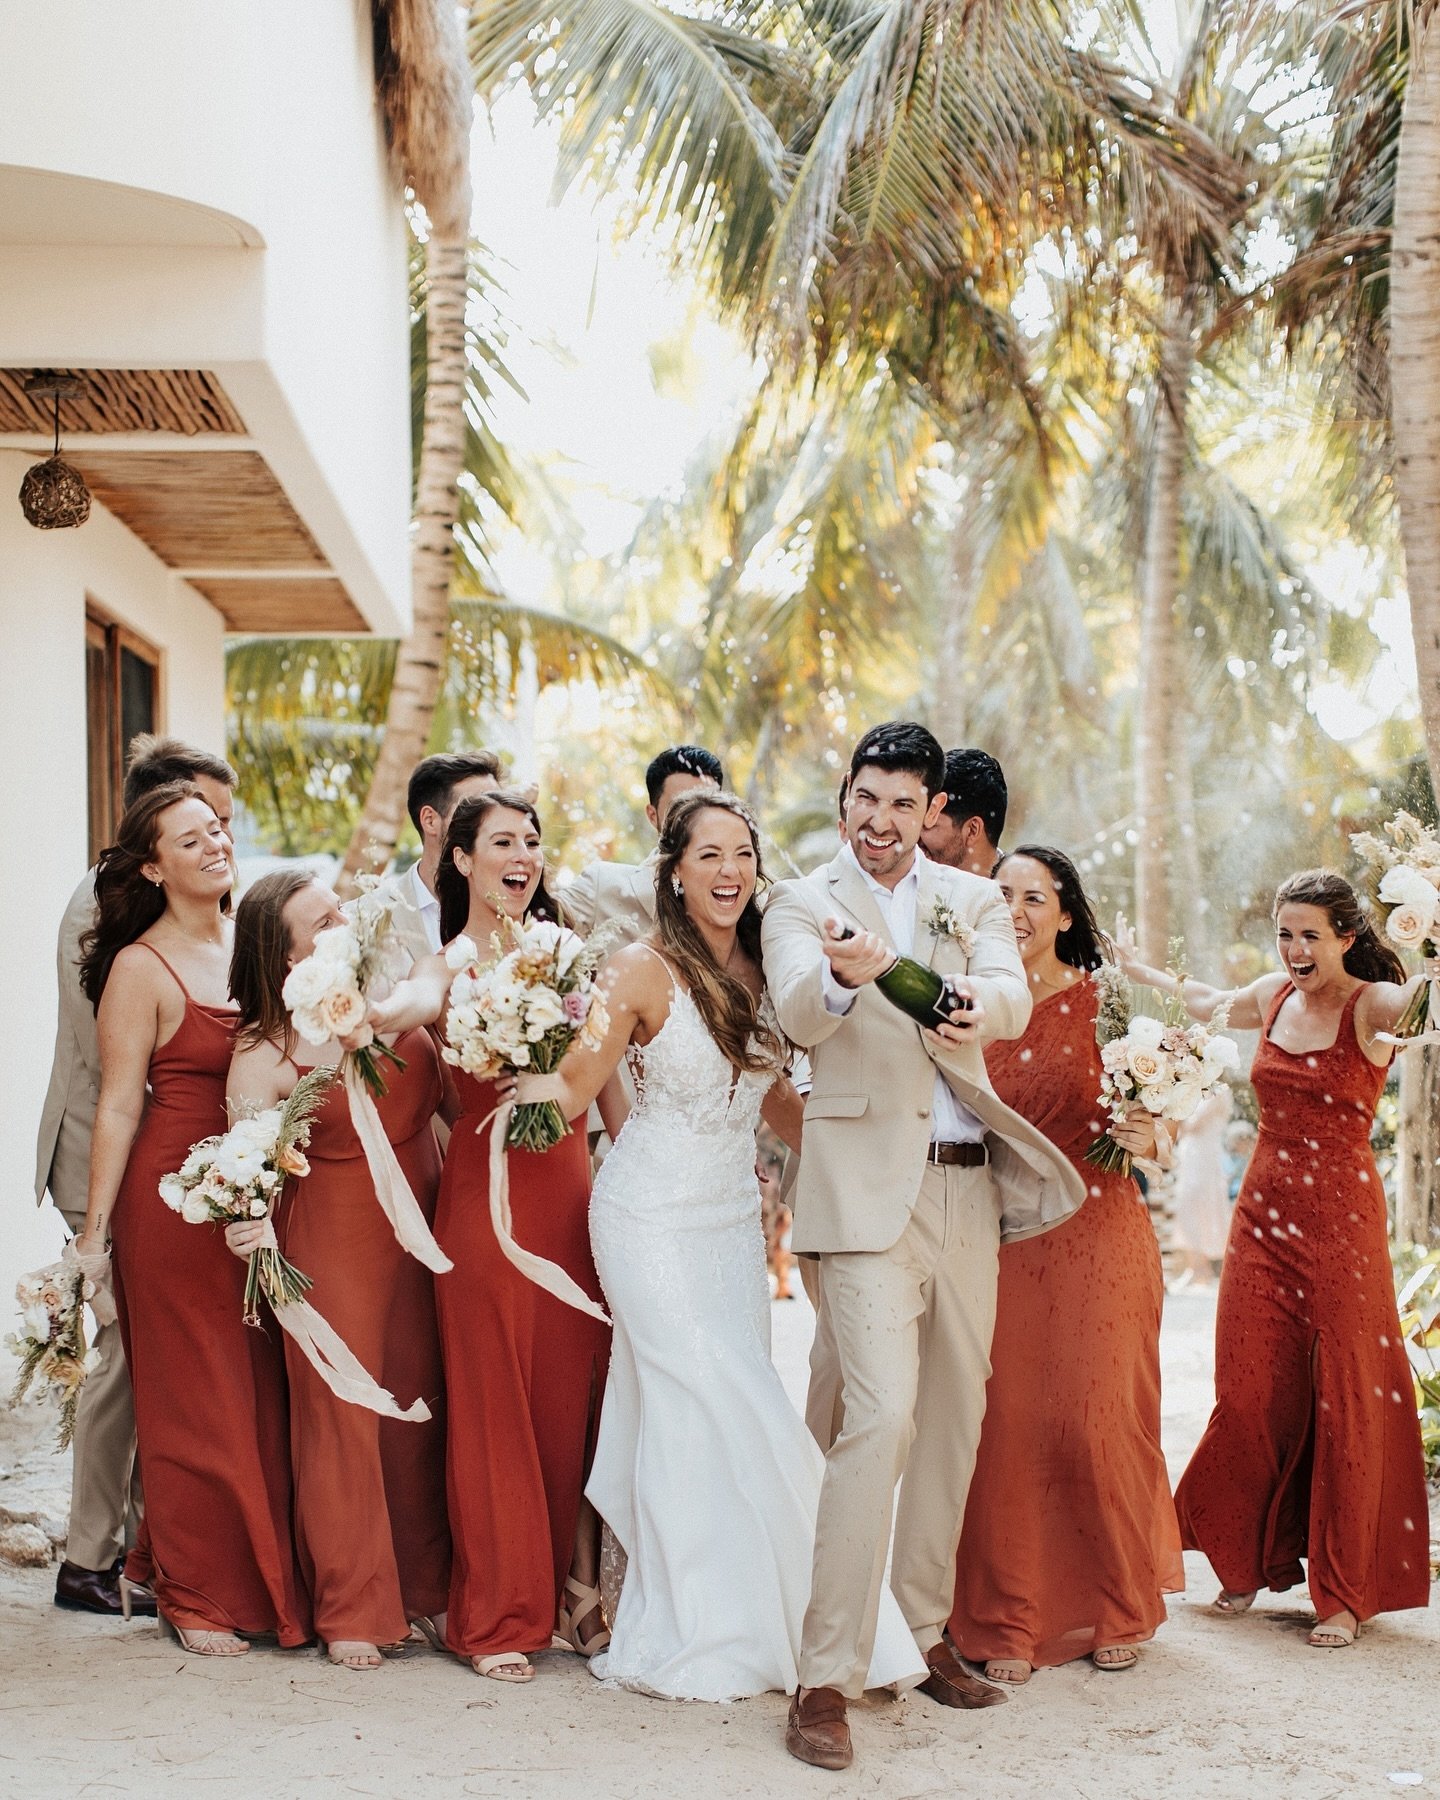 Feeling very pregnant and wishing I could be back shooting this wedding in Mexico with a spicy marg in my hand! Lol Emilee + Gabe&rsquo;s Tulum wedding was so epic in every way!!!